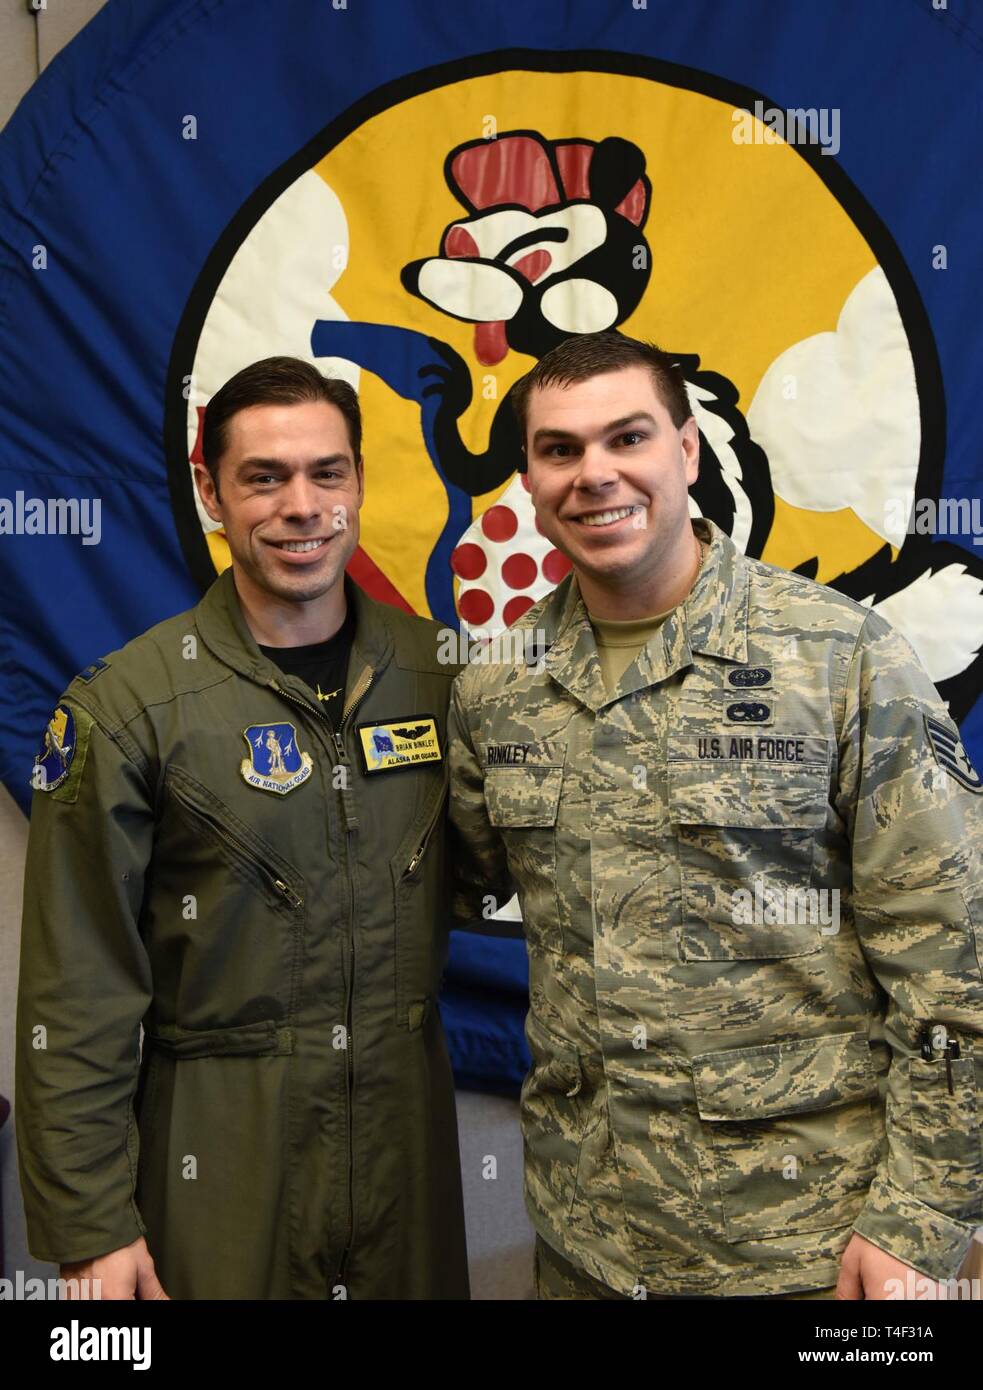 Alaska Air National Guardsmen Capt. Brian Binkley, 168th Air Refueling Squadron pilot, and Staff Sgt. Aaron Binkley, 168th Operations Support Squadron combat crew communications technician, pose in front of the operations group squadron patch on April 7, 2019. The brothers work for the same squadron carrying out different jobs to support the 168th Wing’s air refueling mission. The squadron patch pictures a skunk holding a gas nozzle in the sky to illustrate “passing gas.” Stock Photo